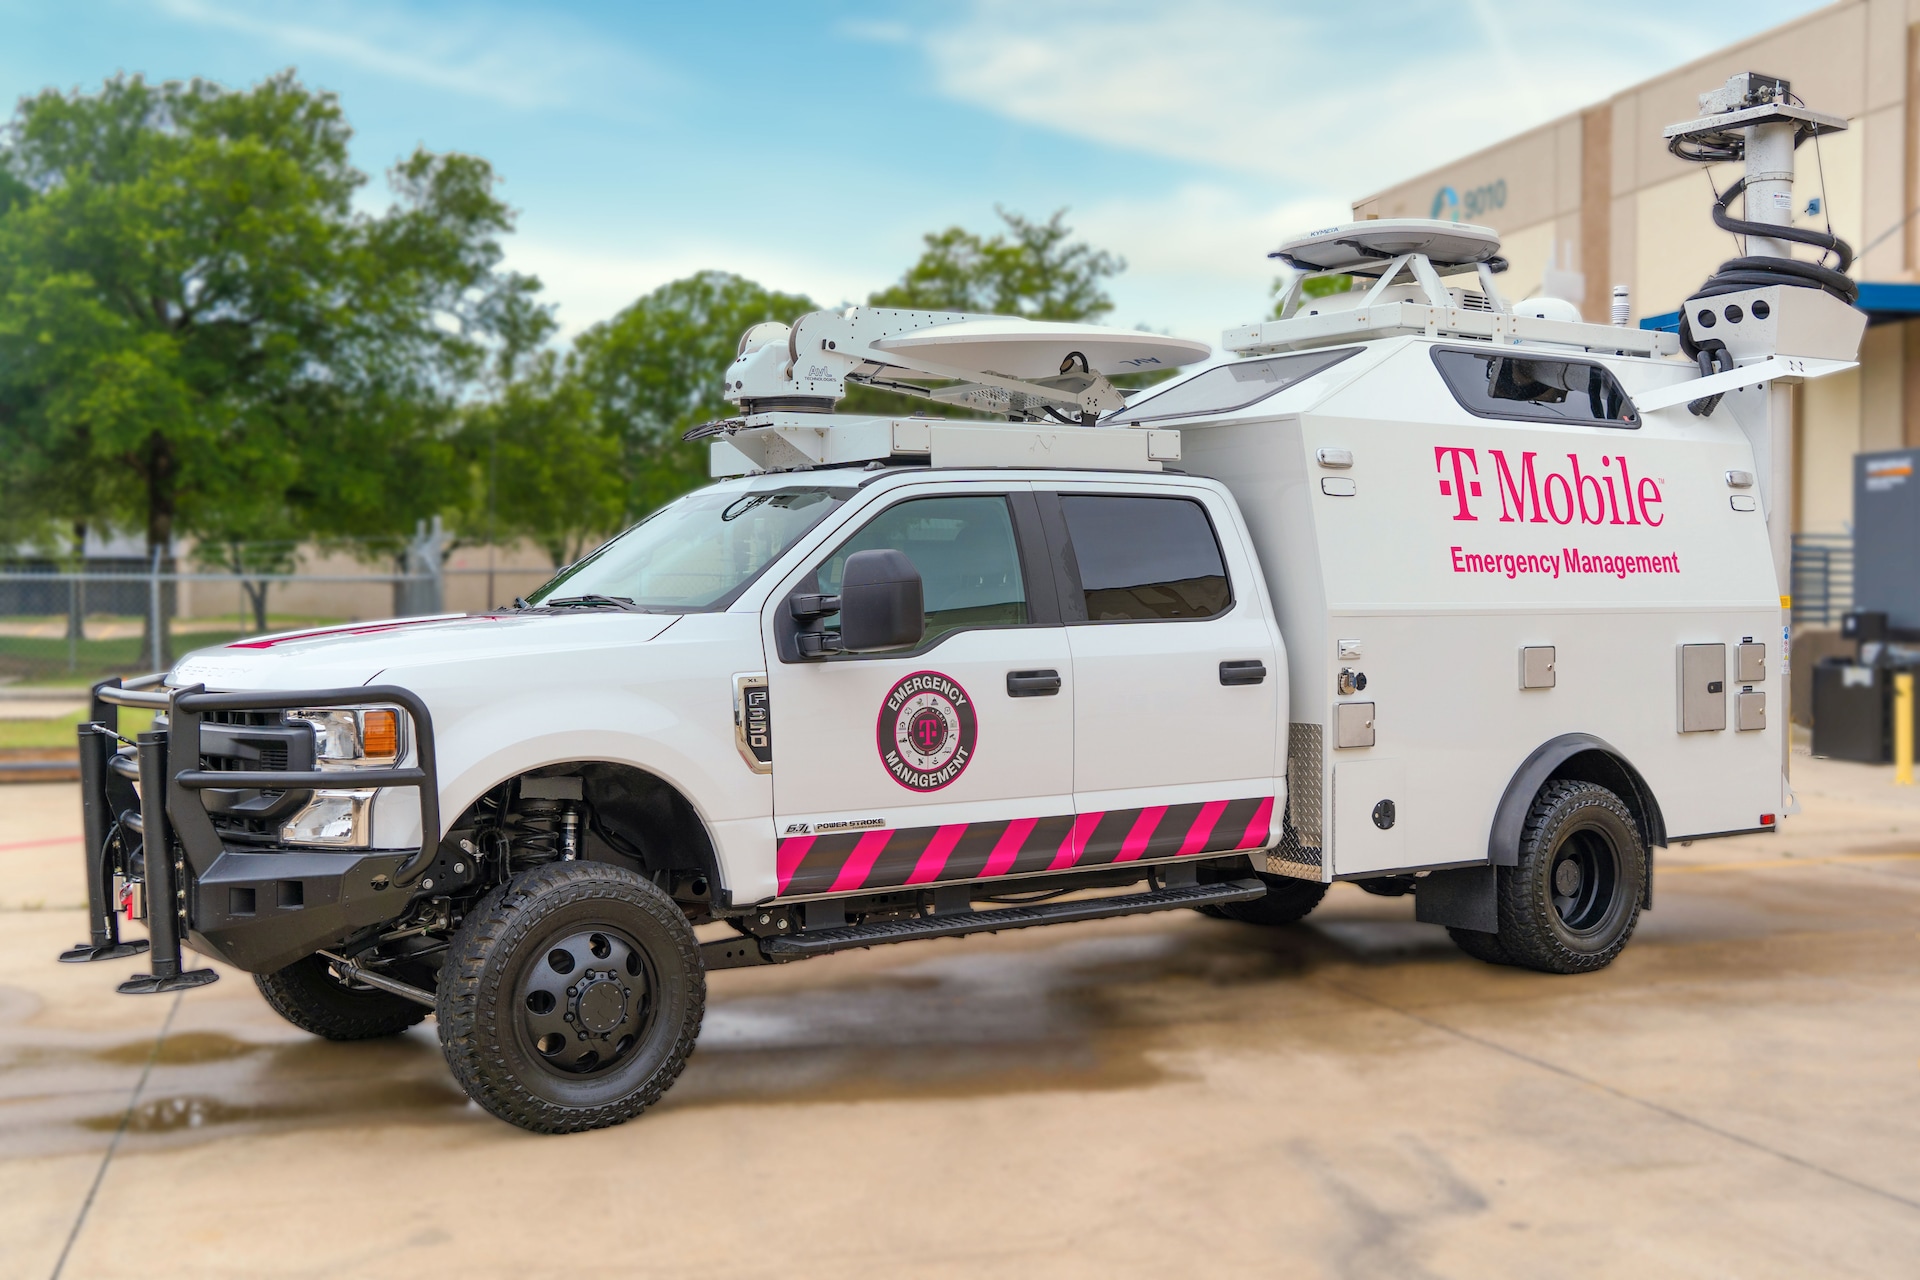 T-Mobile logo branded truck titled Emergency Management. Vehicle has satellite equipment retracted to convey portability and is parked outdoors